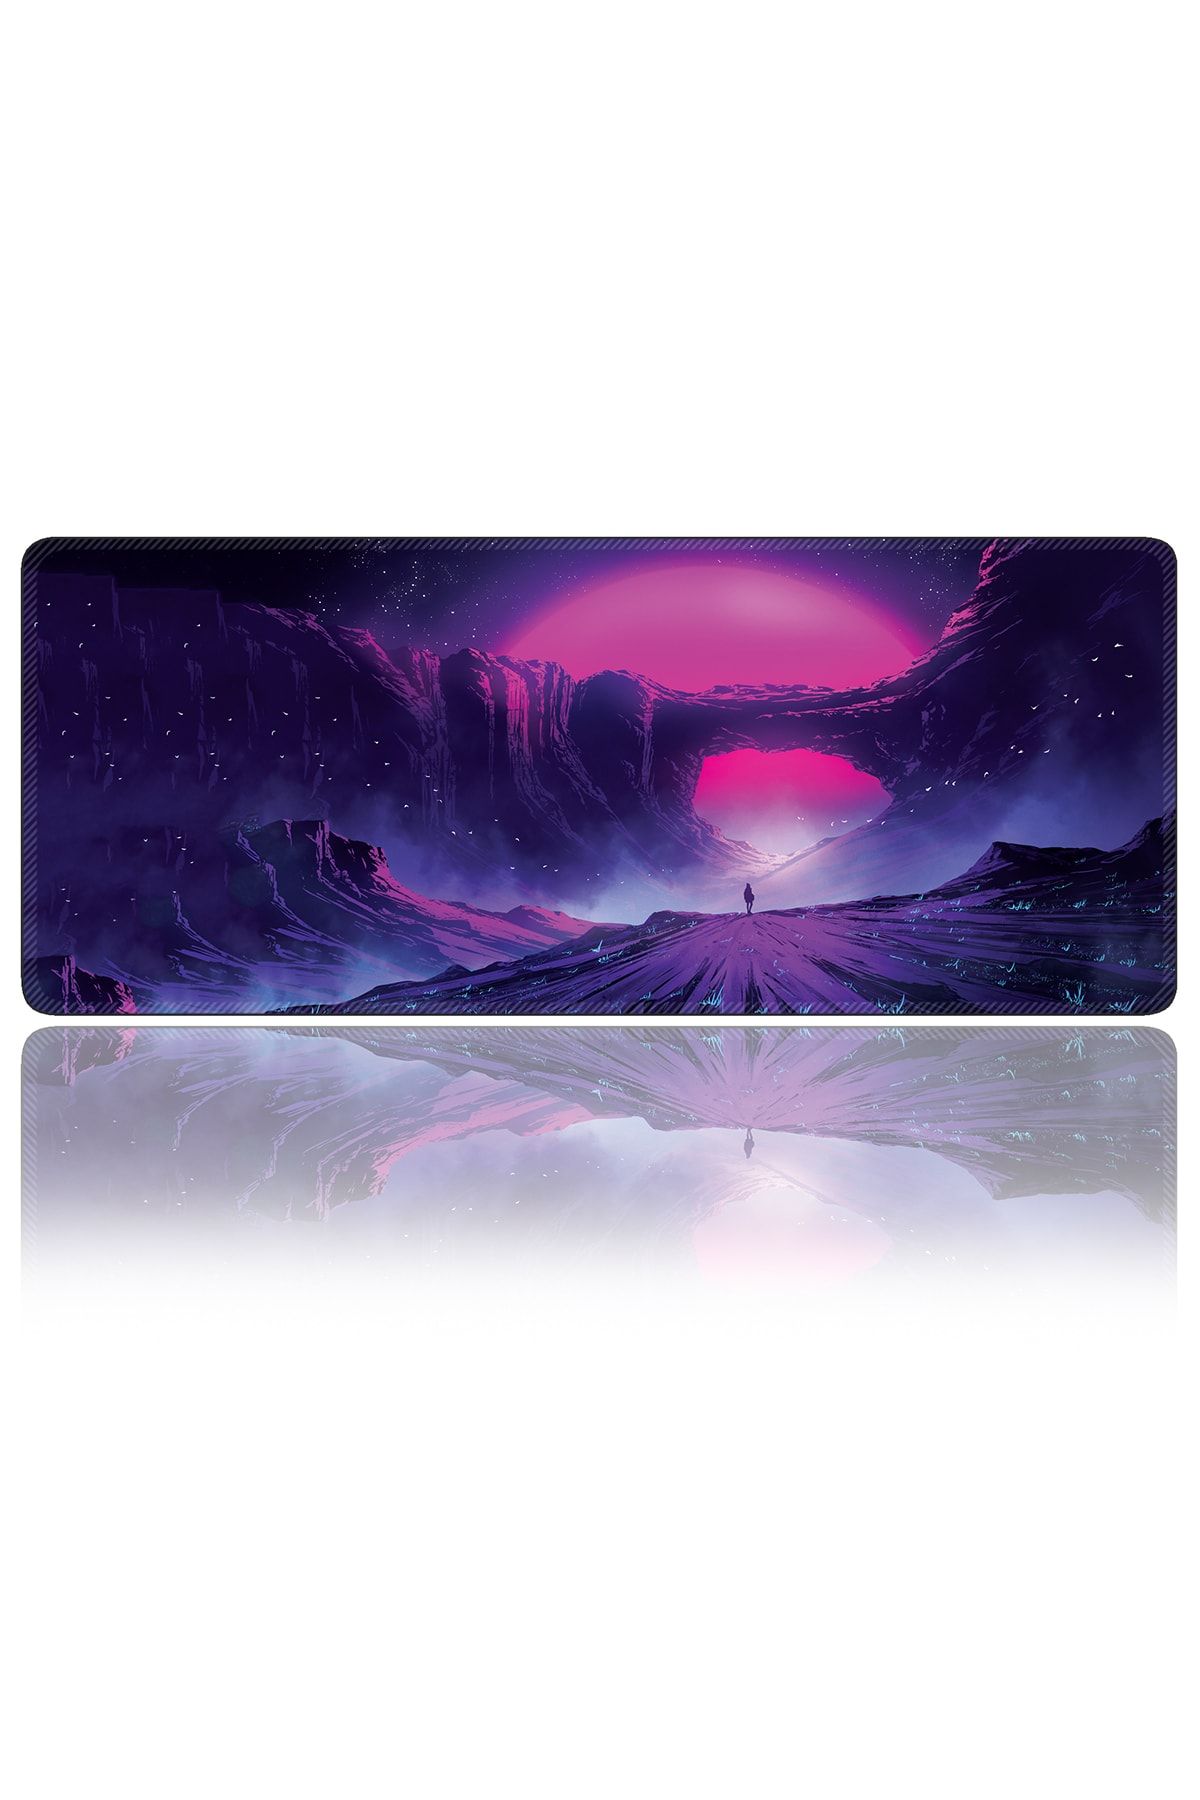 Xrades Other World 90x40 cm Xxl Gaming Oyuncu Mousepad Mouse Pad